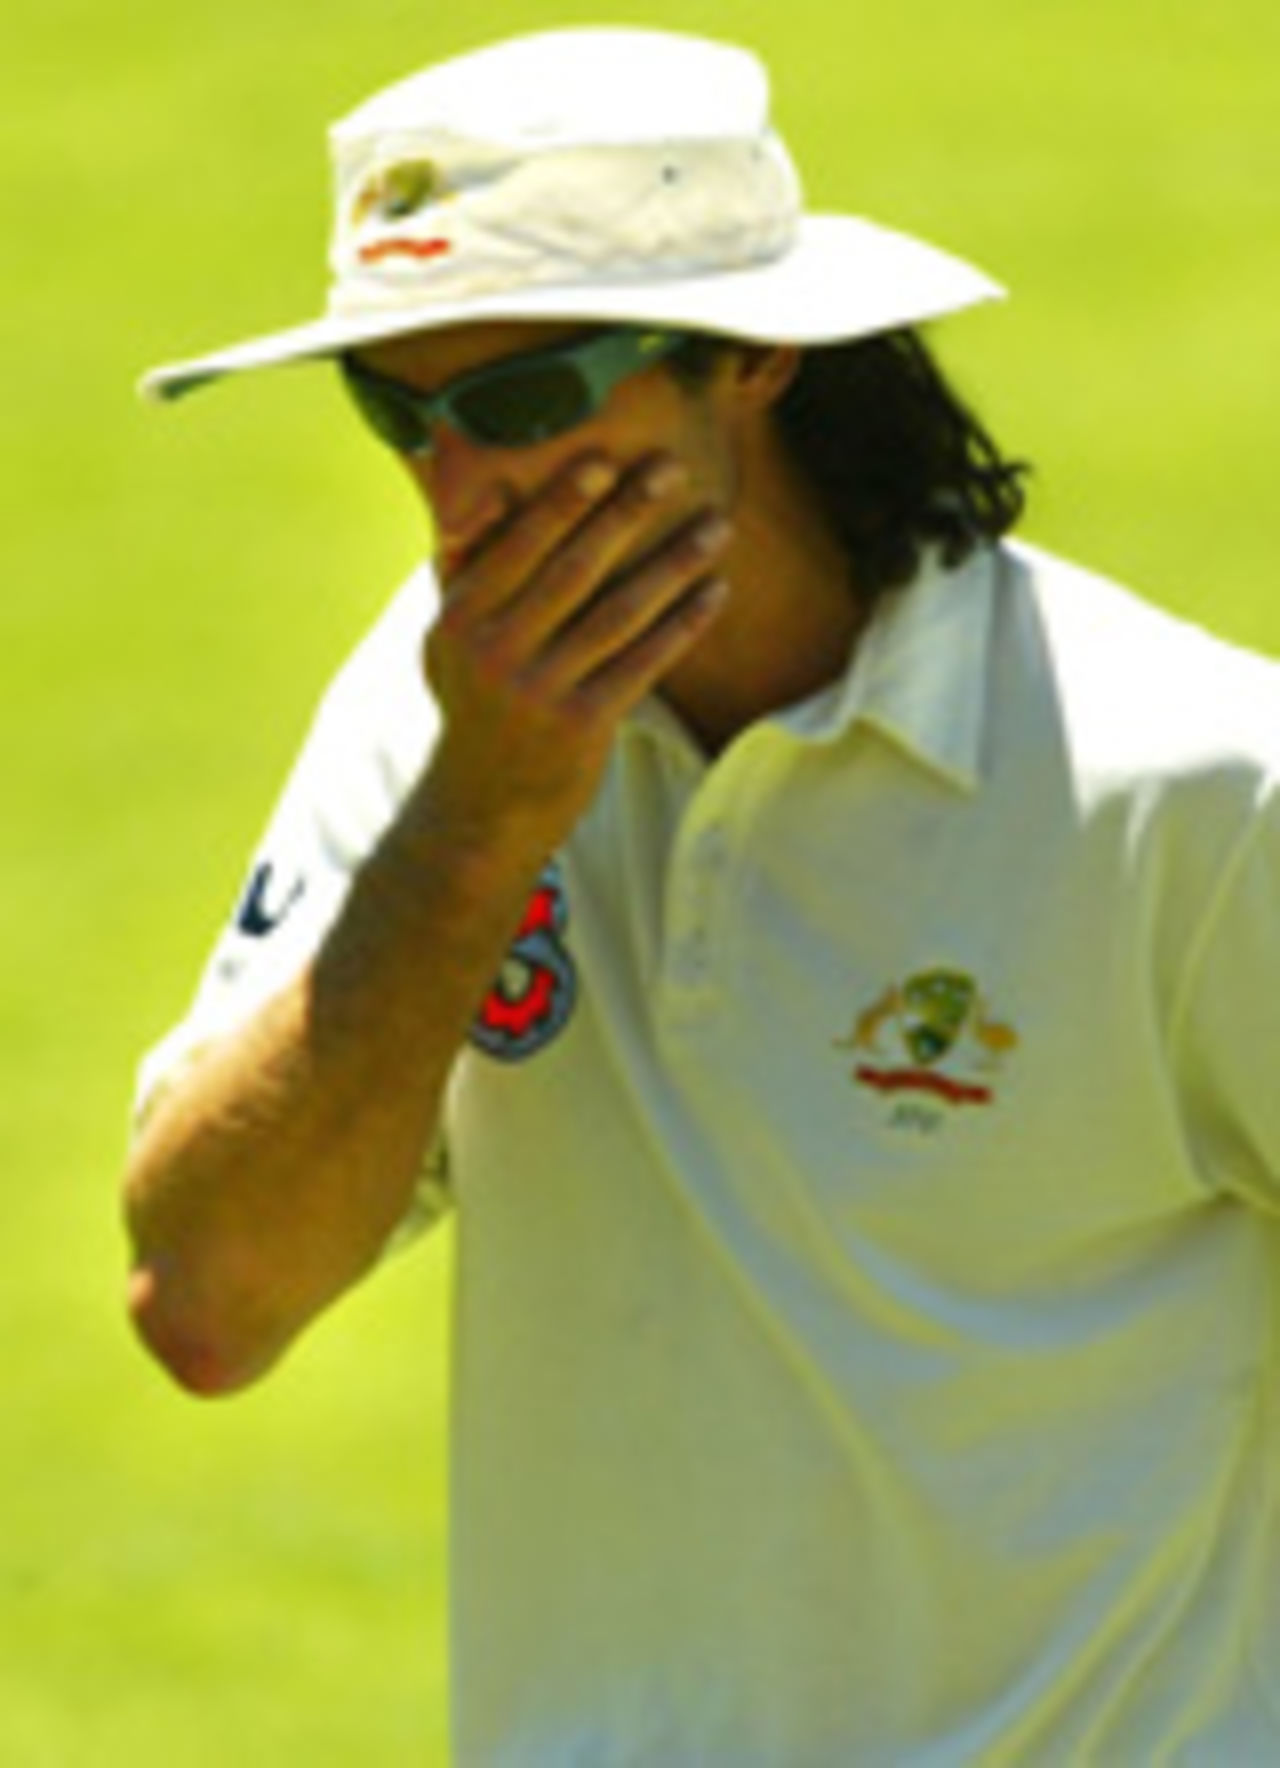 Gillespie leaves the field after a groin strain, Australia v India, 2nd Test, Adelaide, 5th day, Dec 15, 2003